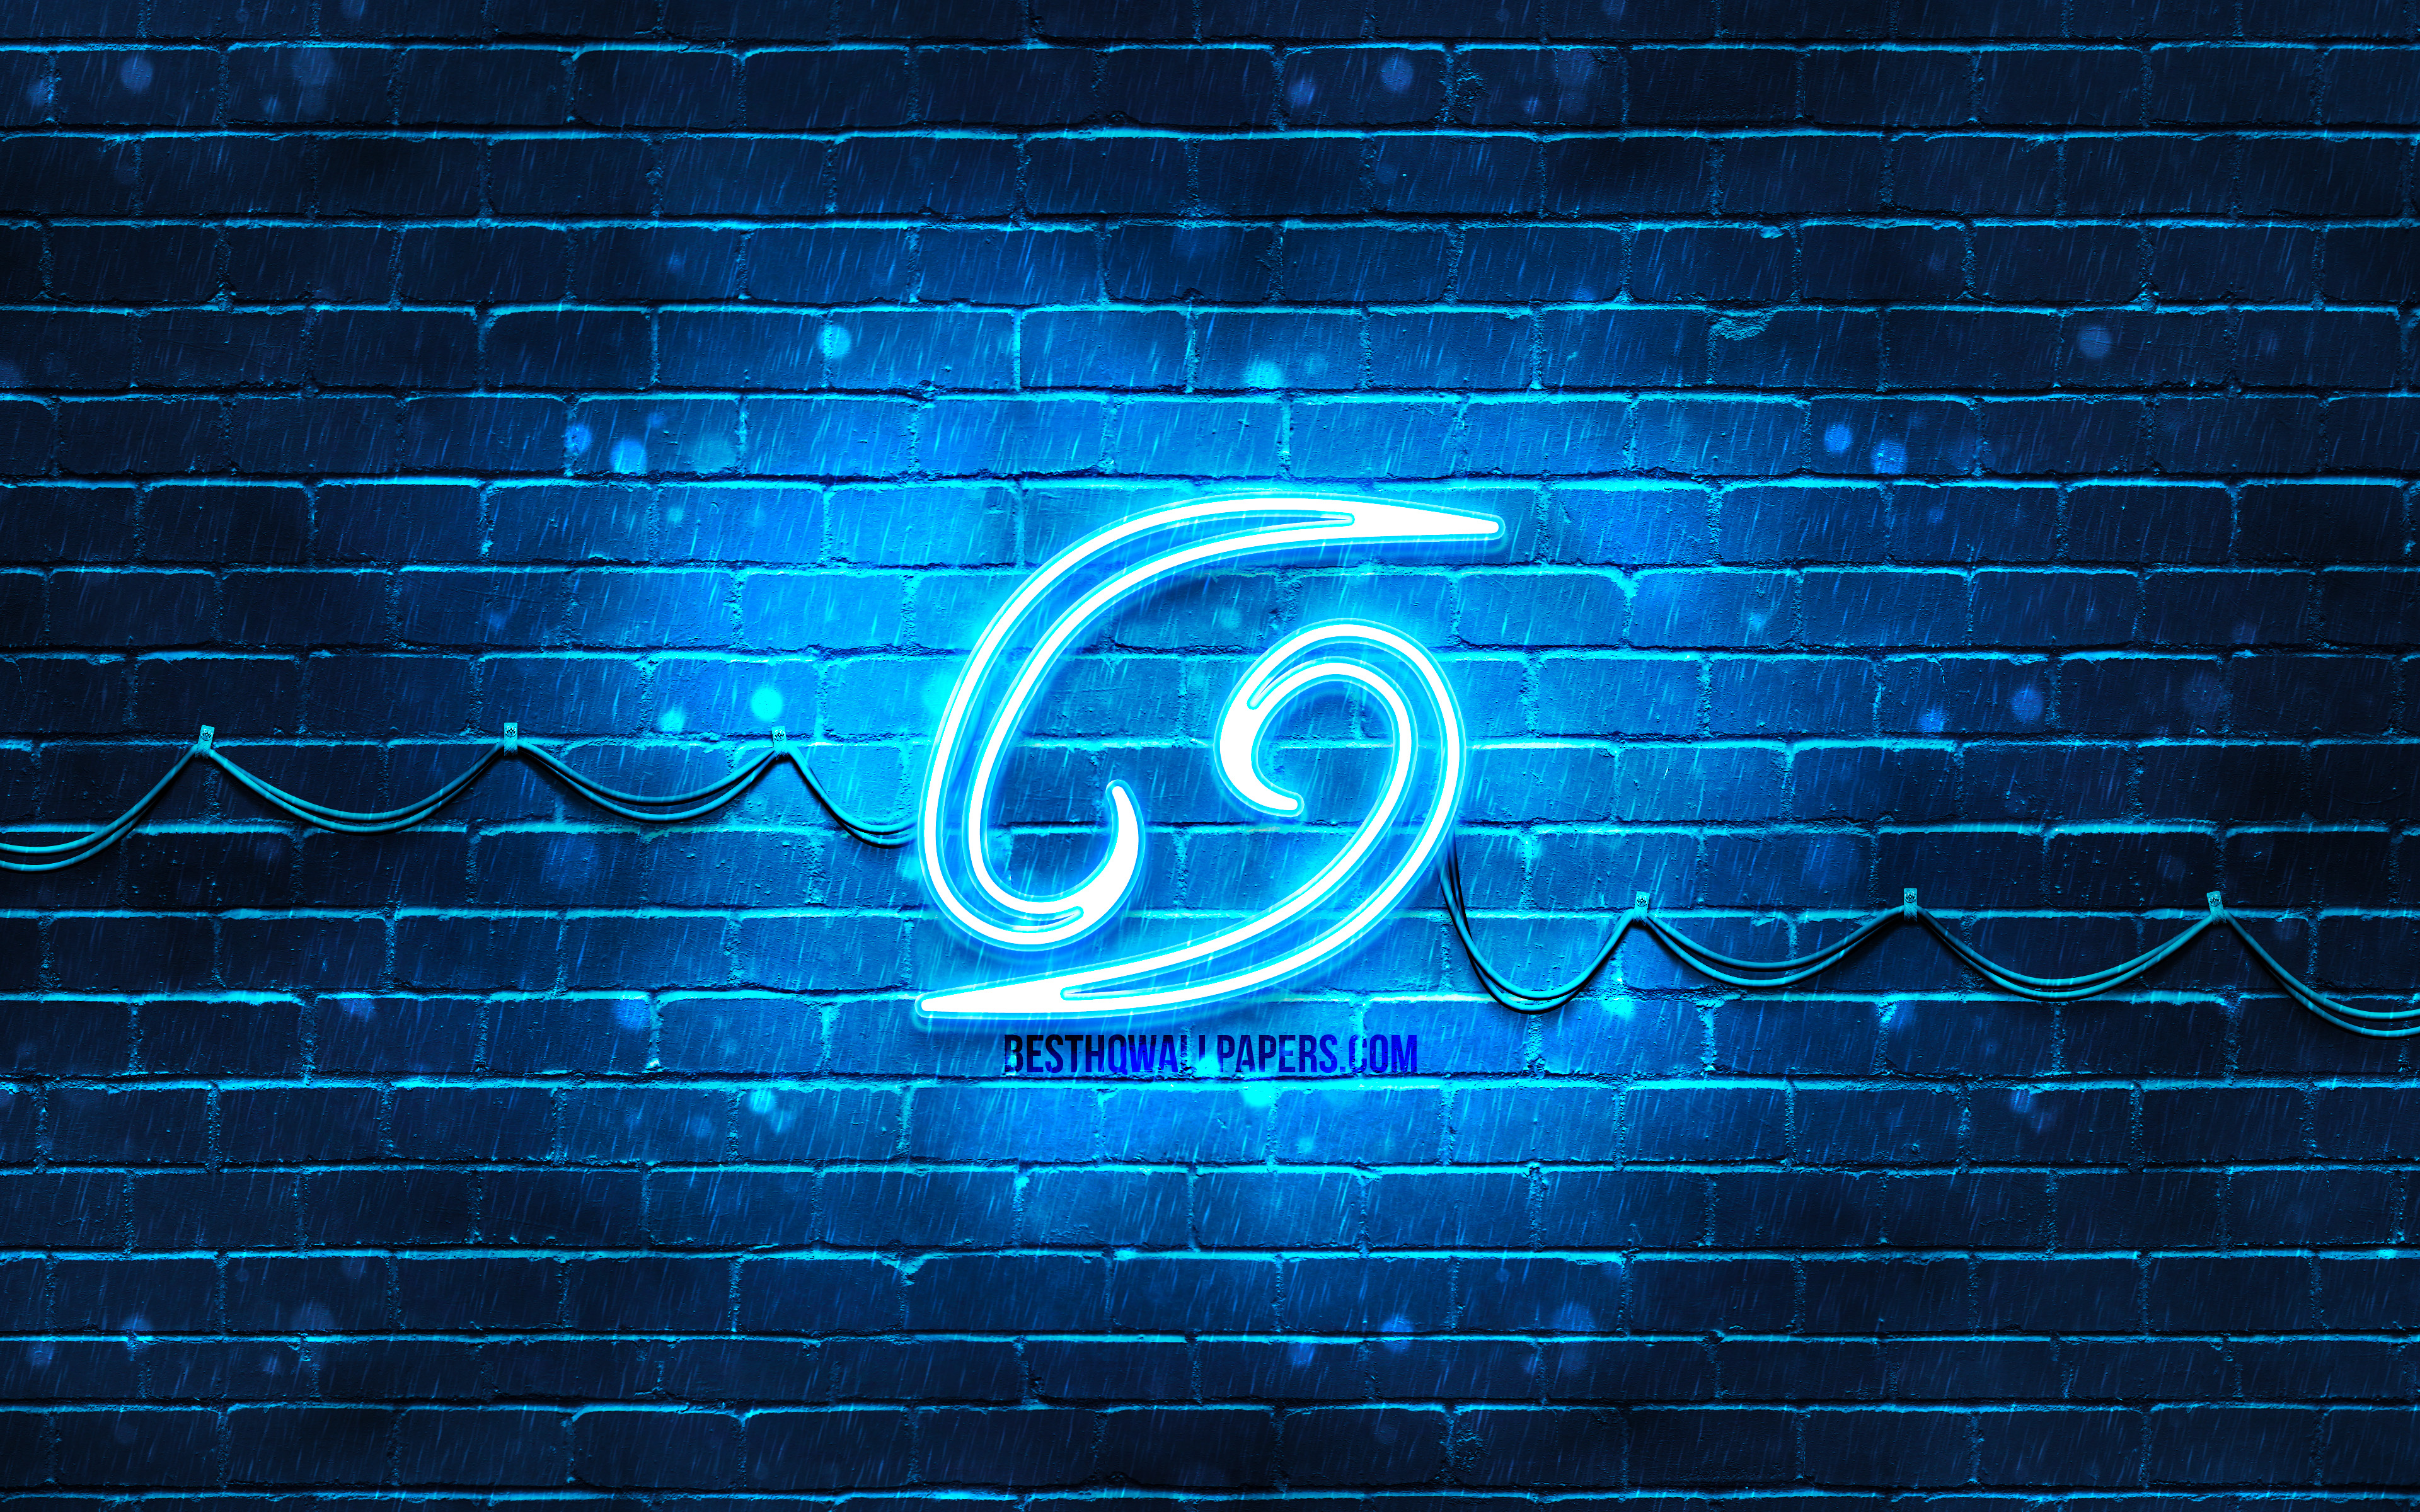 Download wallpaper Cancer neon sign, 4k, blue brickwall, creative art, zodiac signs, Cancer zodiac symbol, Cancer zodiac sign, astrology, Cancer Horoscope sign, astrological sign, zodiac neon signs, Cancer for desktop with resolution